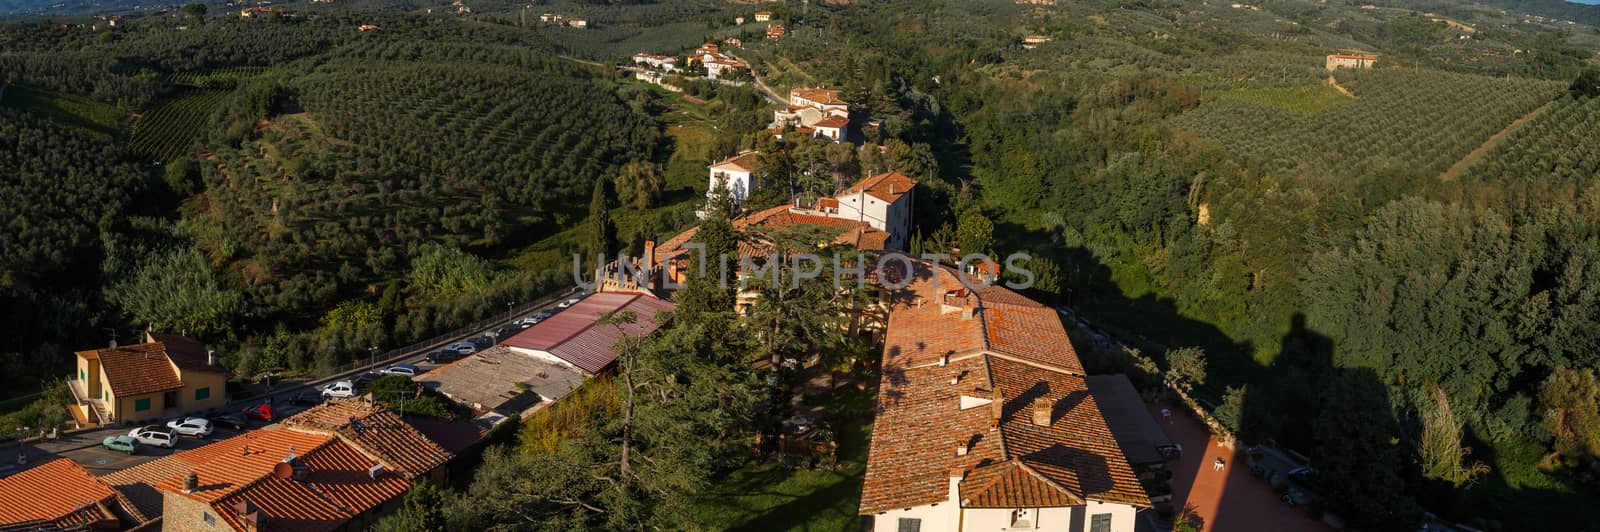 Panoramic top view of Vinci Village around meadow area from Conti Guidi Castle in Italy.